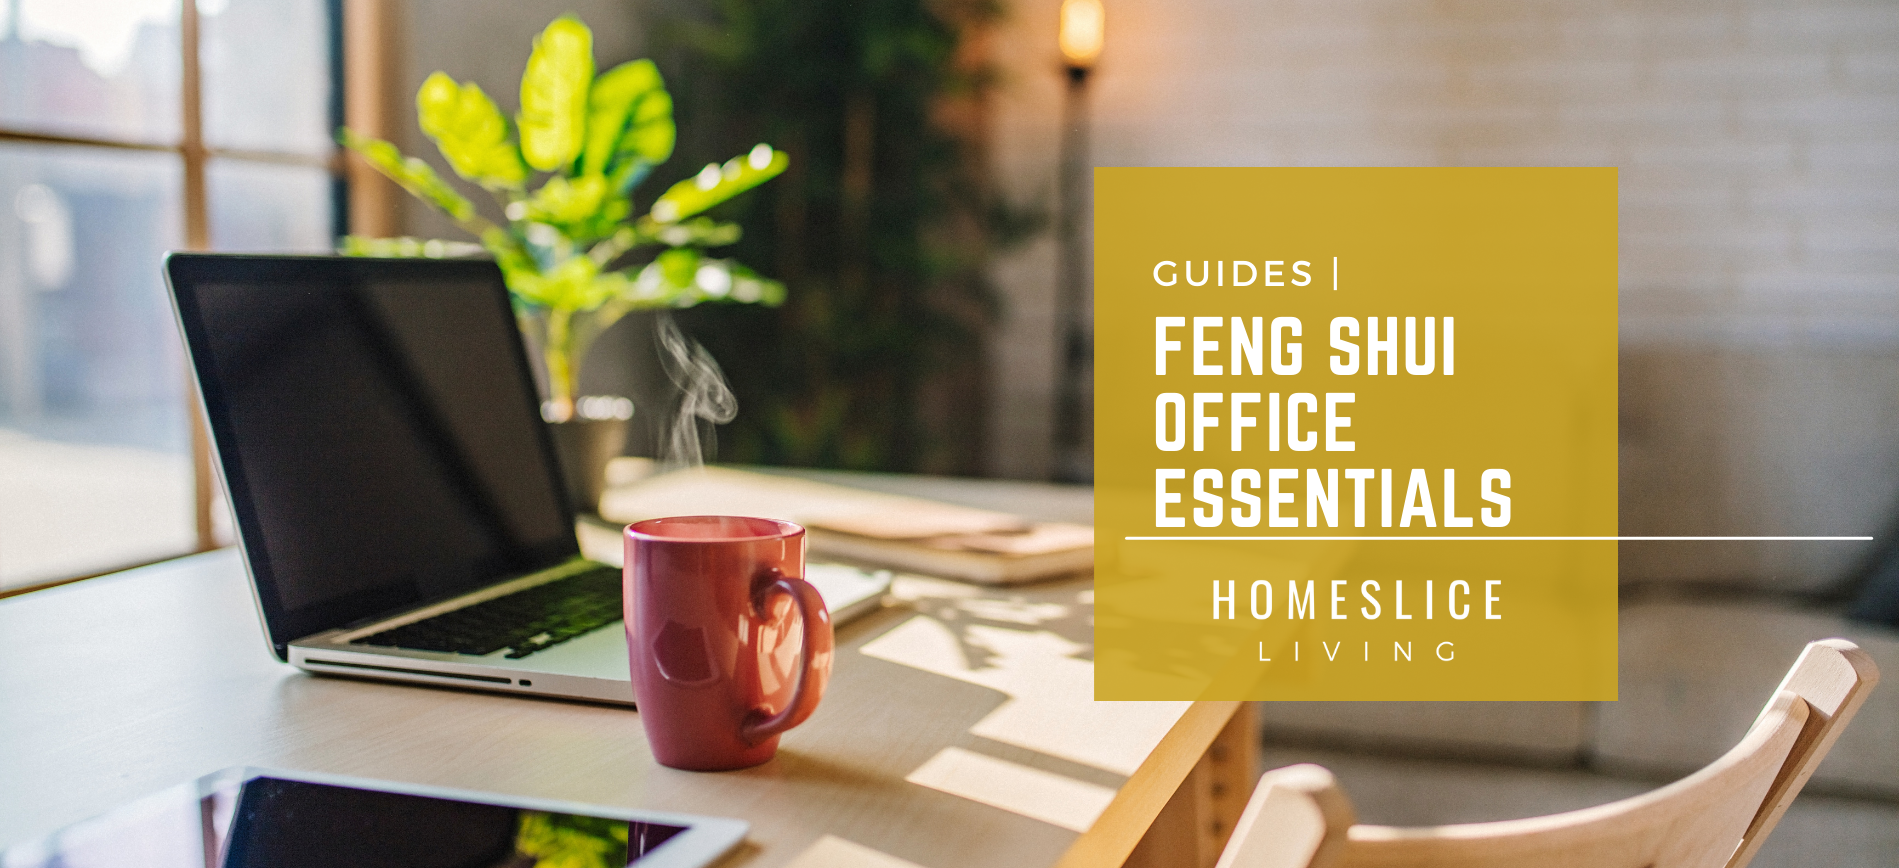 Elevate your office with Feng Shui-inspired essentials for a harmonious and successful workspace.